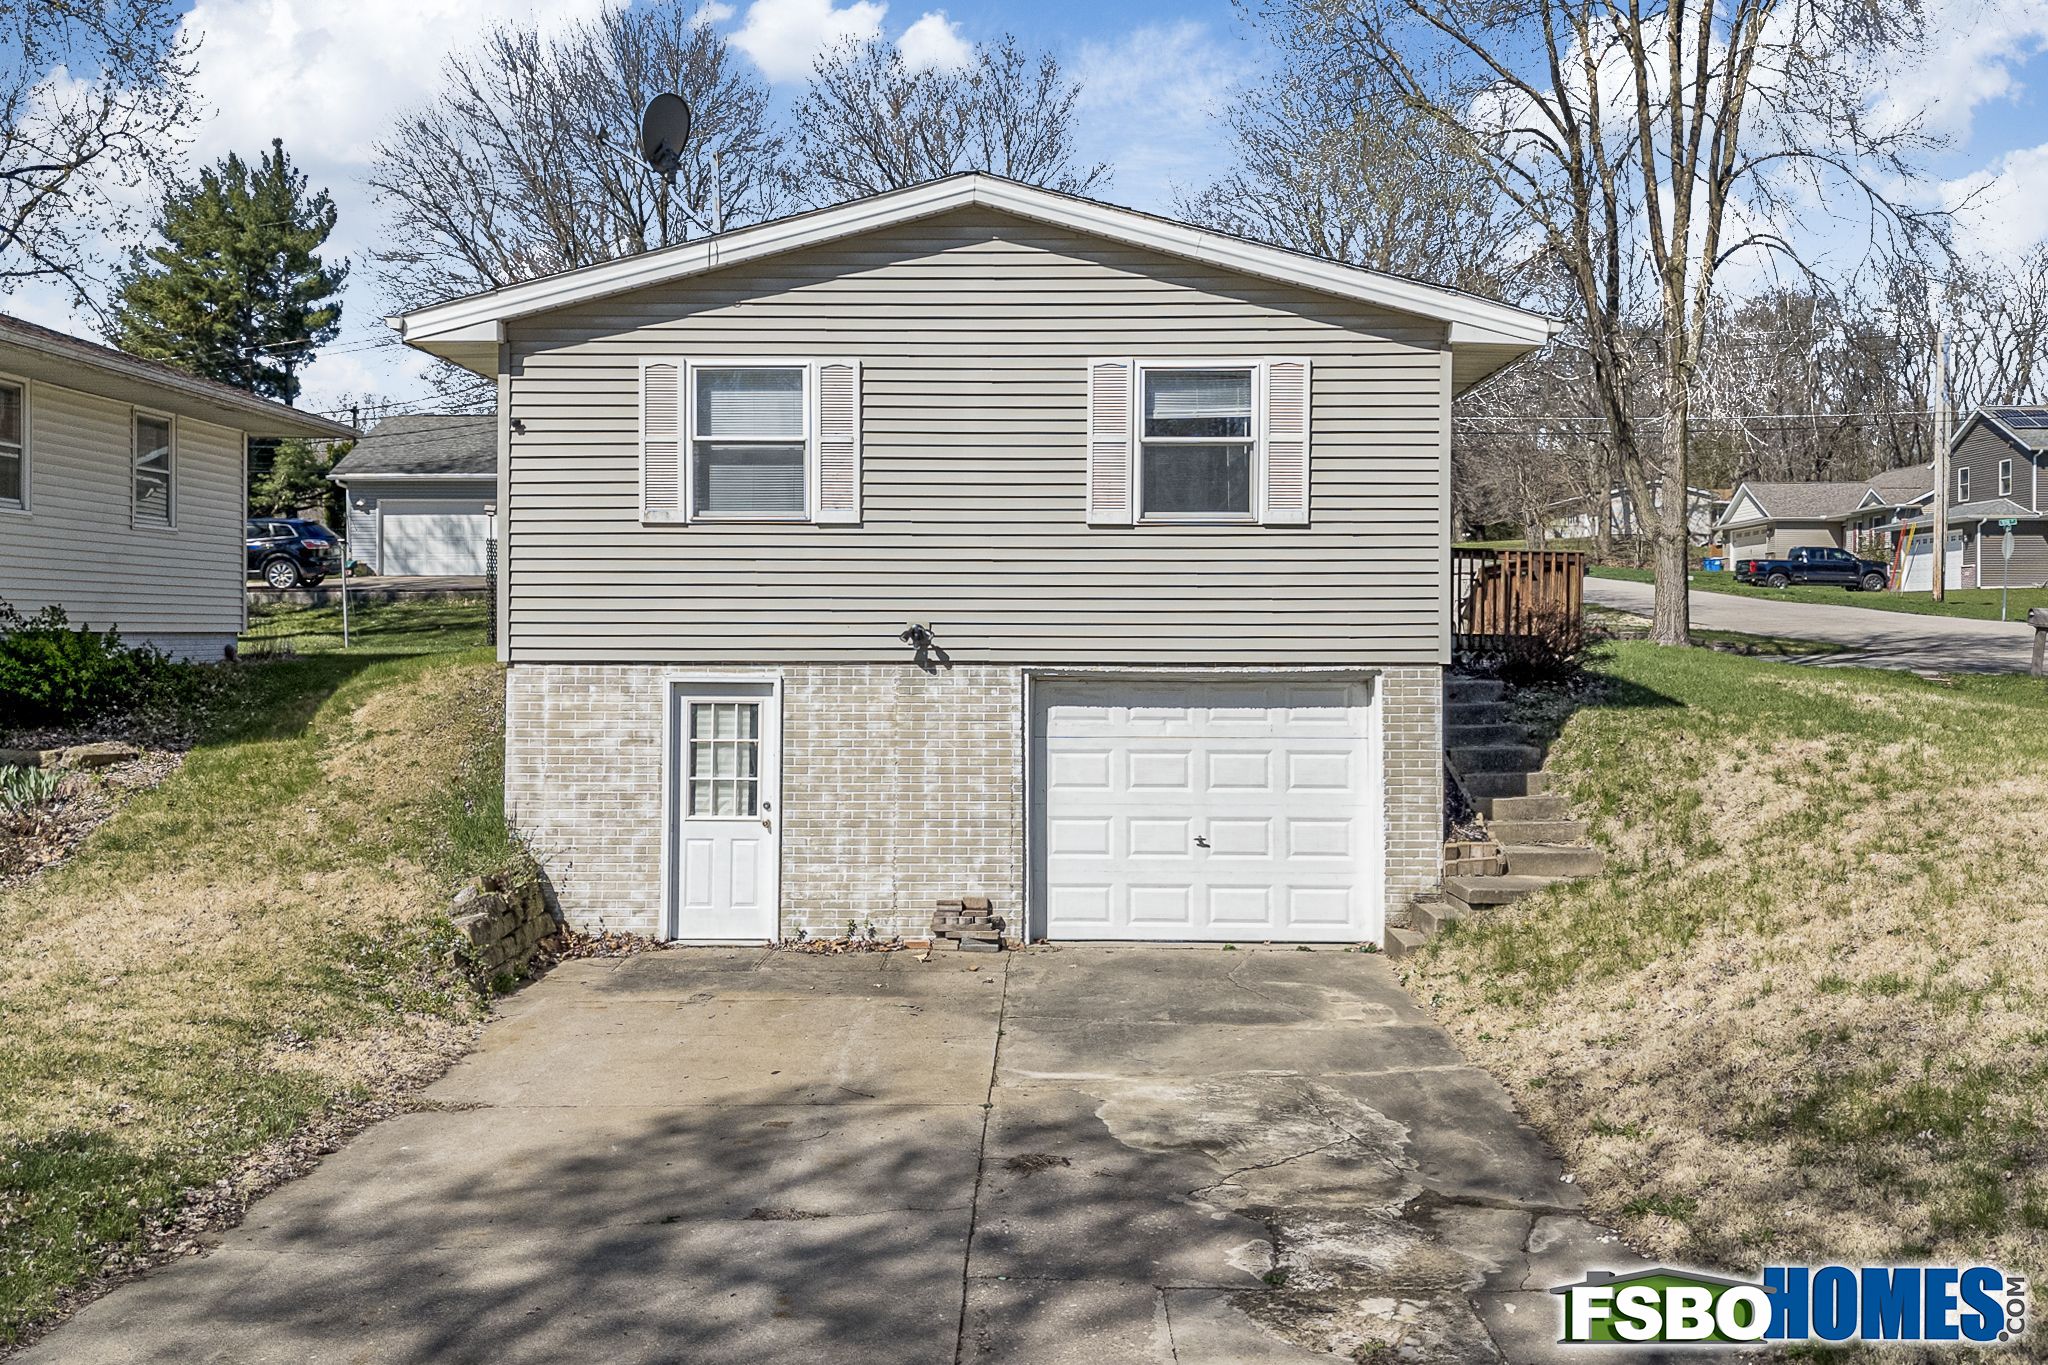 500 May St, Le Claire, IA, Image 29